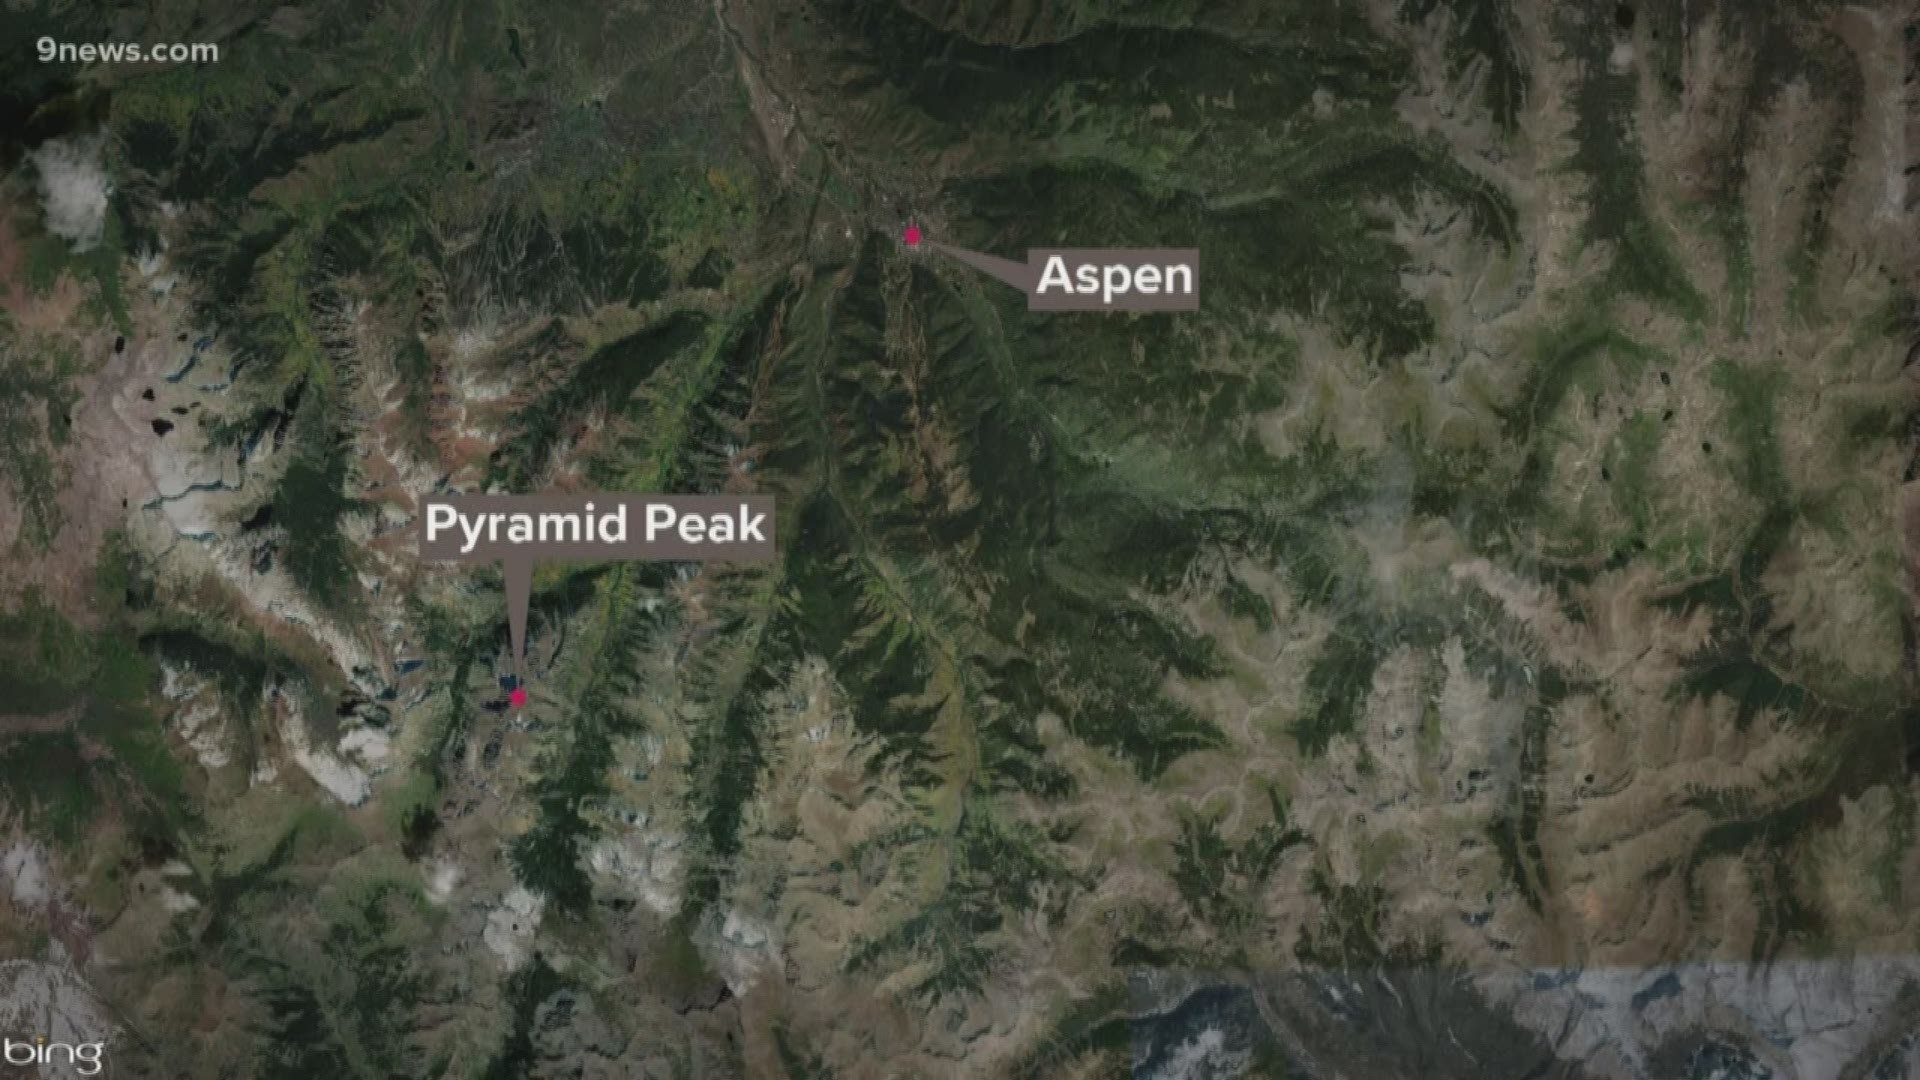 A 66-year-old Denver man who became separated from his hiking group on Pyramid Peak was found alive after a nearly two and a half-day search.